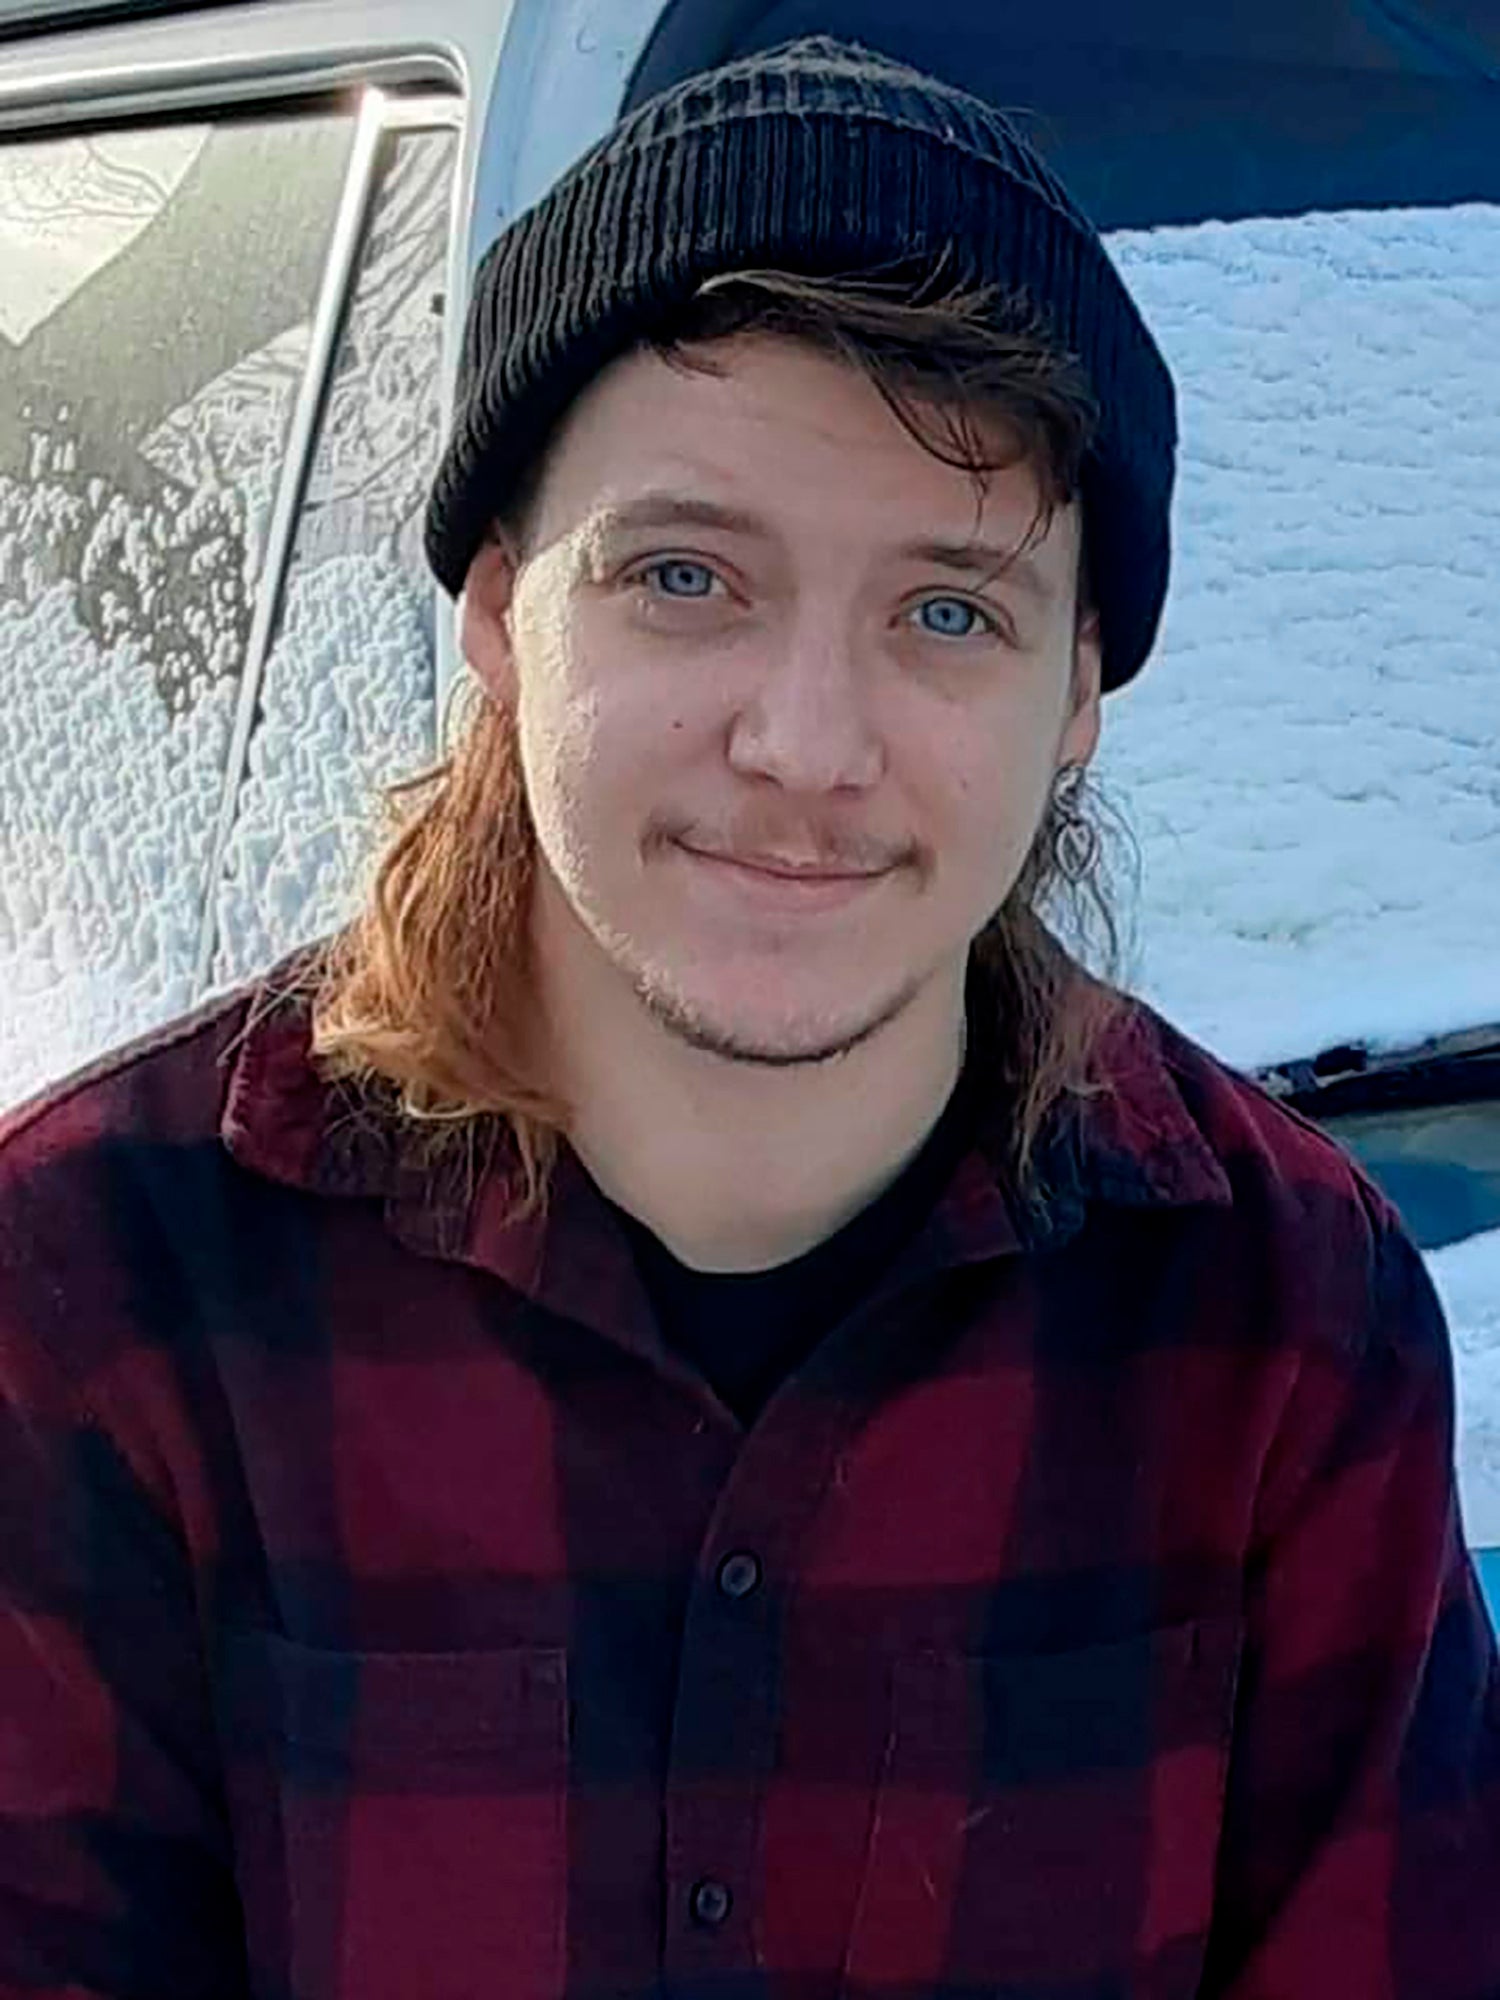 Daniel Aston, a 28-year-old beloved bartender at Club Q in Colorado Springs, died while trying to protect his friend and coworker when a shooter attacked the LGBTQ hotspot in November 2022